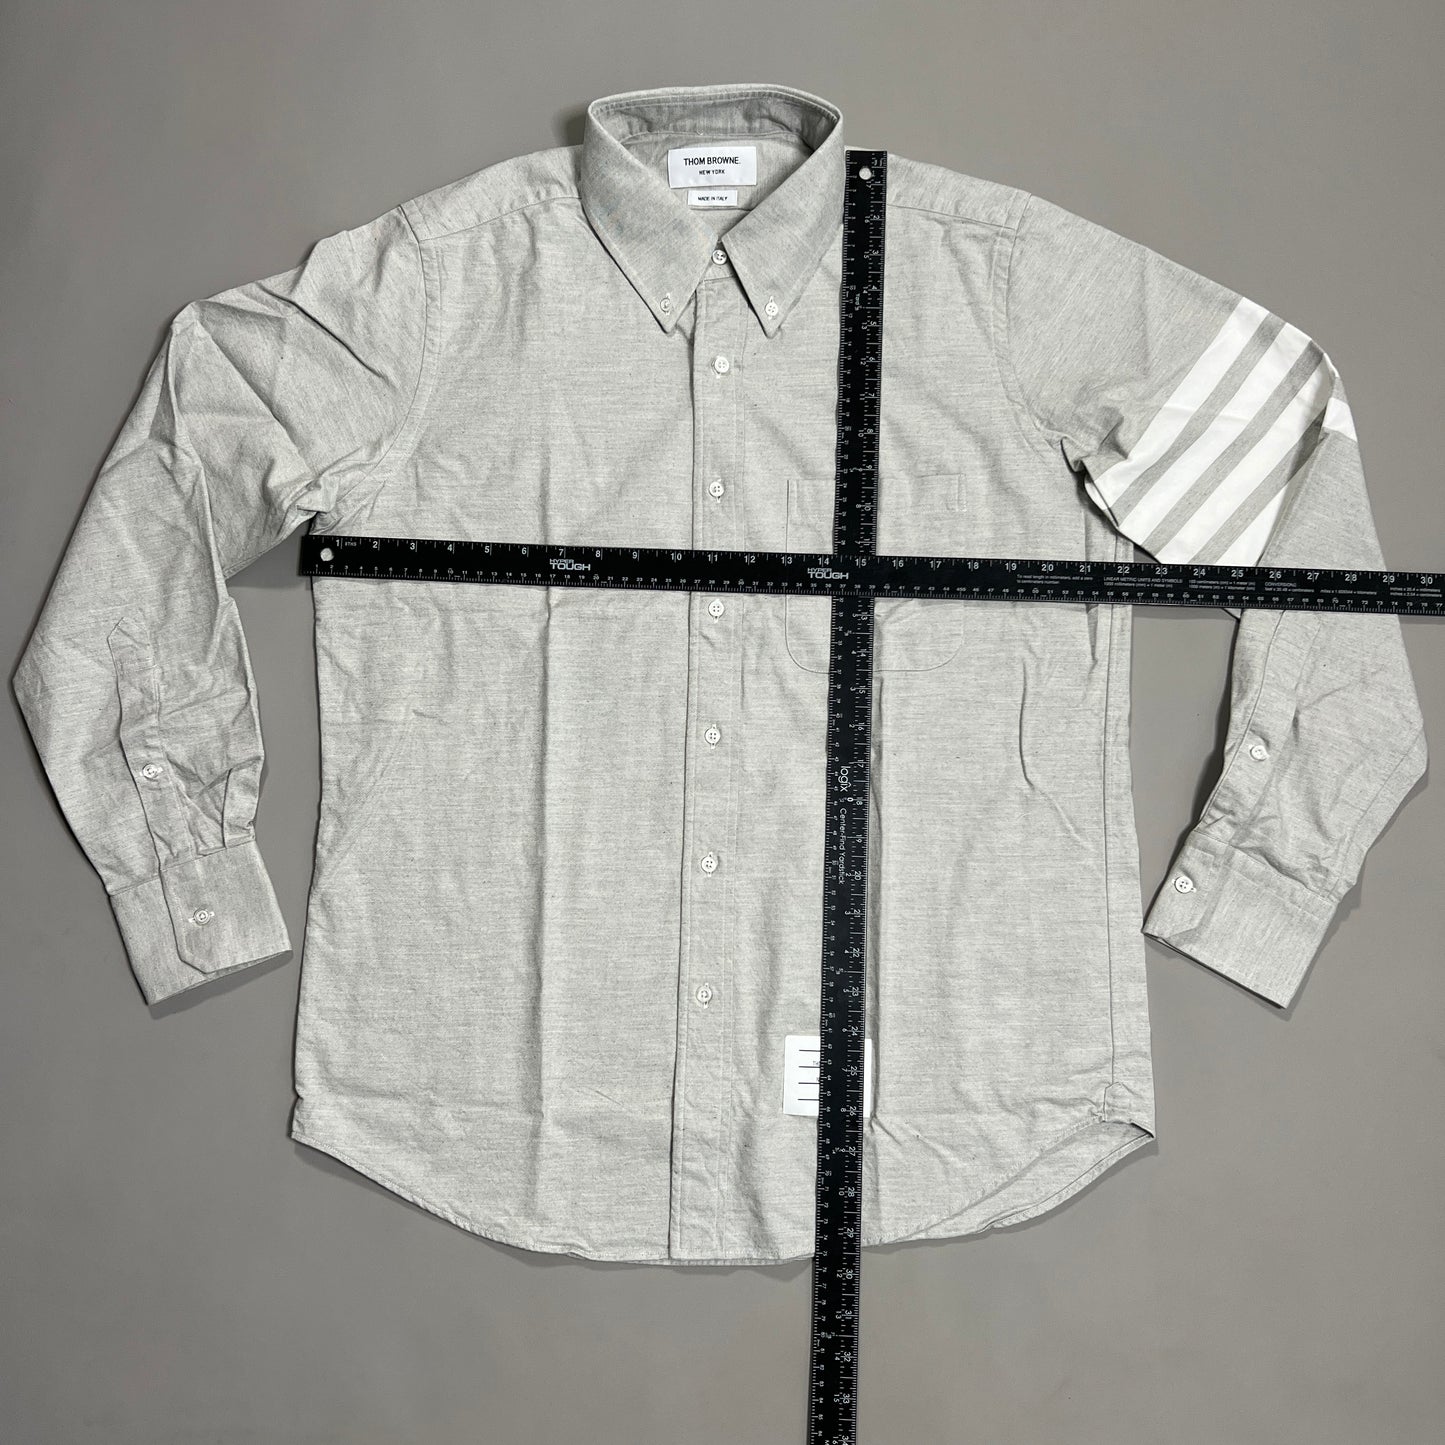 THOM BROWNE Straight Fit Button-Down Long Sleeve w/CB RWB Flannel shirt w/woven 4 Bar Sleeve in Med Grey Size 3 (NEW)